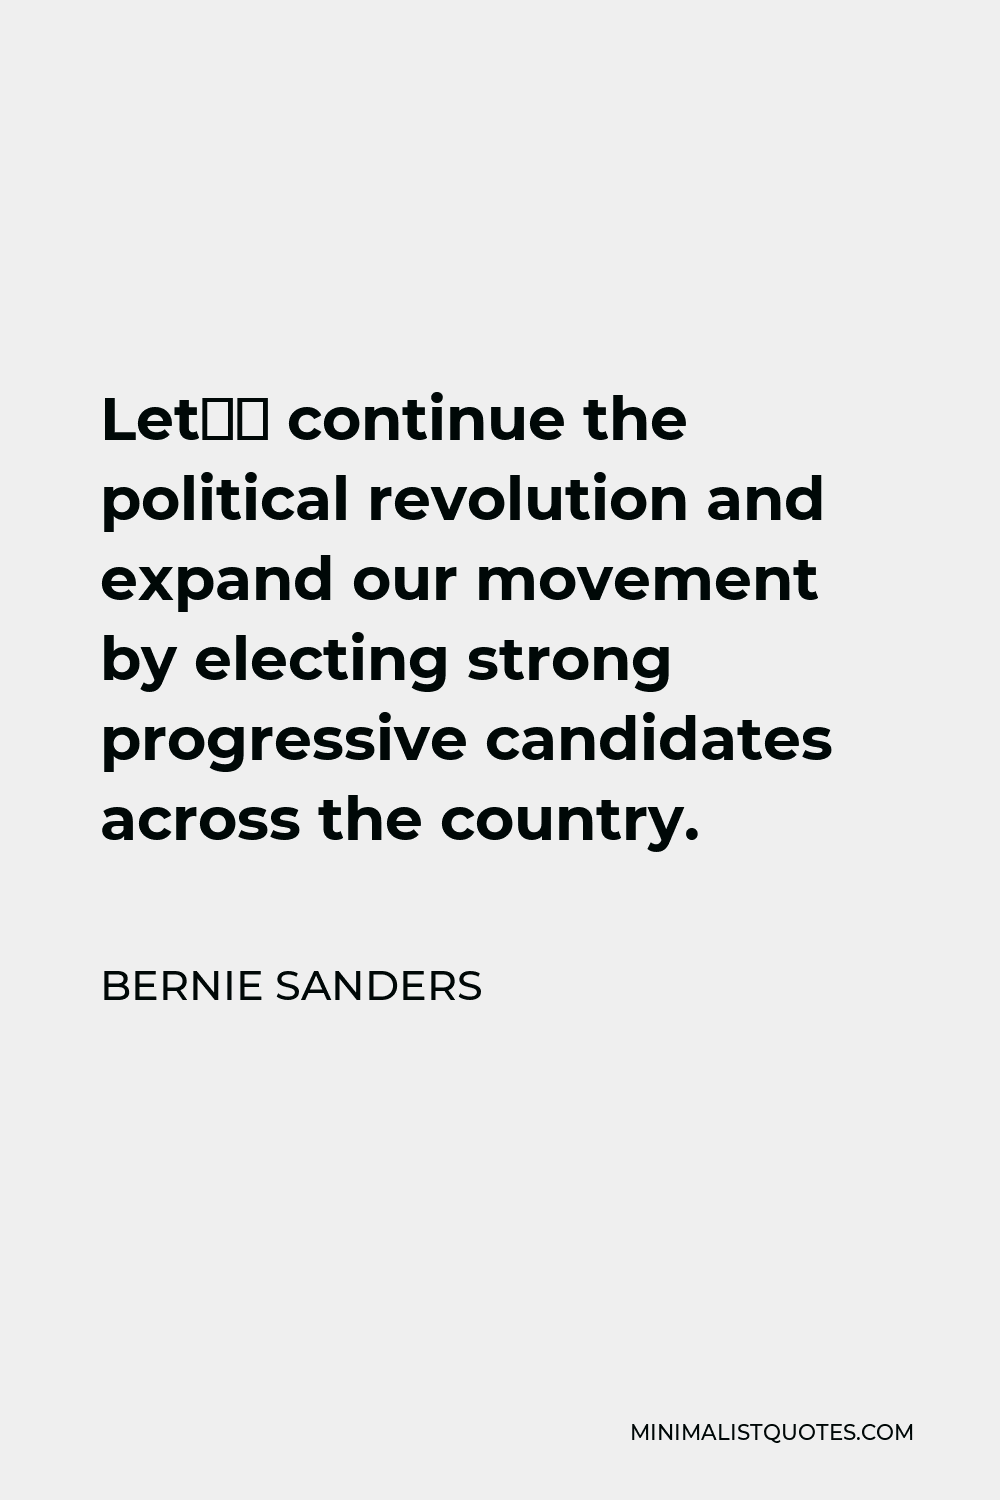 Bernie Sanders Quote - Let’s continue the political revolution and expand our movement by electing strong progressive candidates across the country.